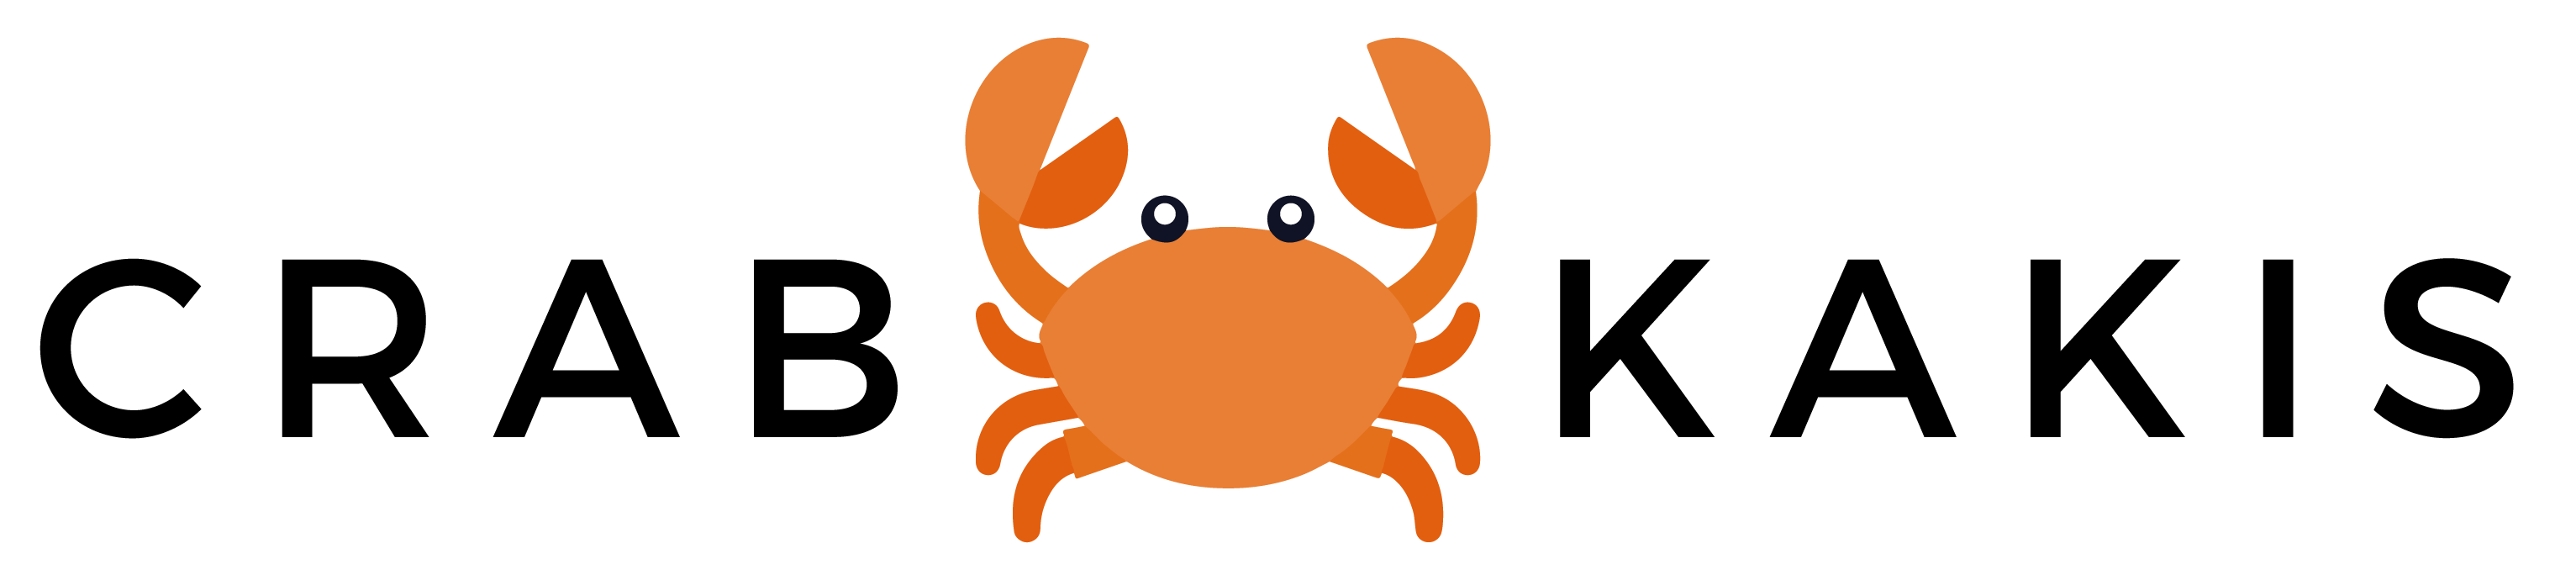 lobster clipart king crab